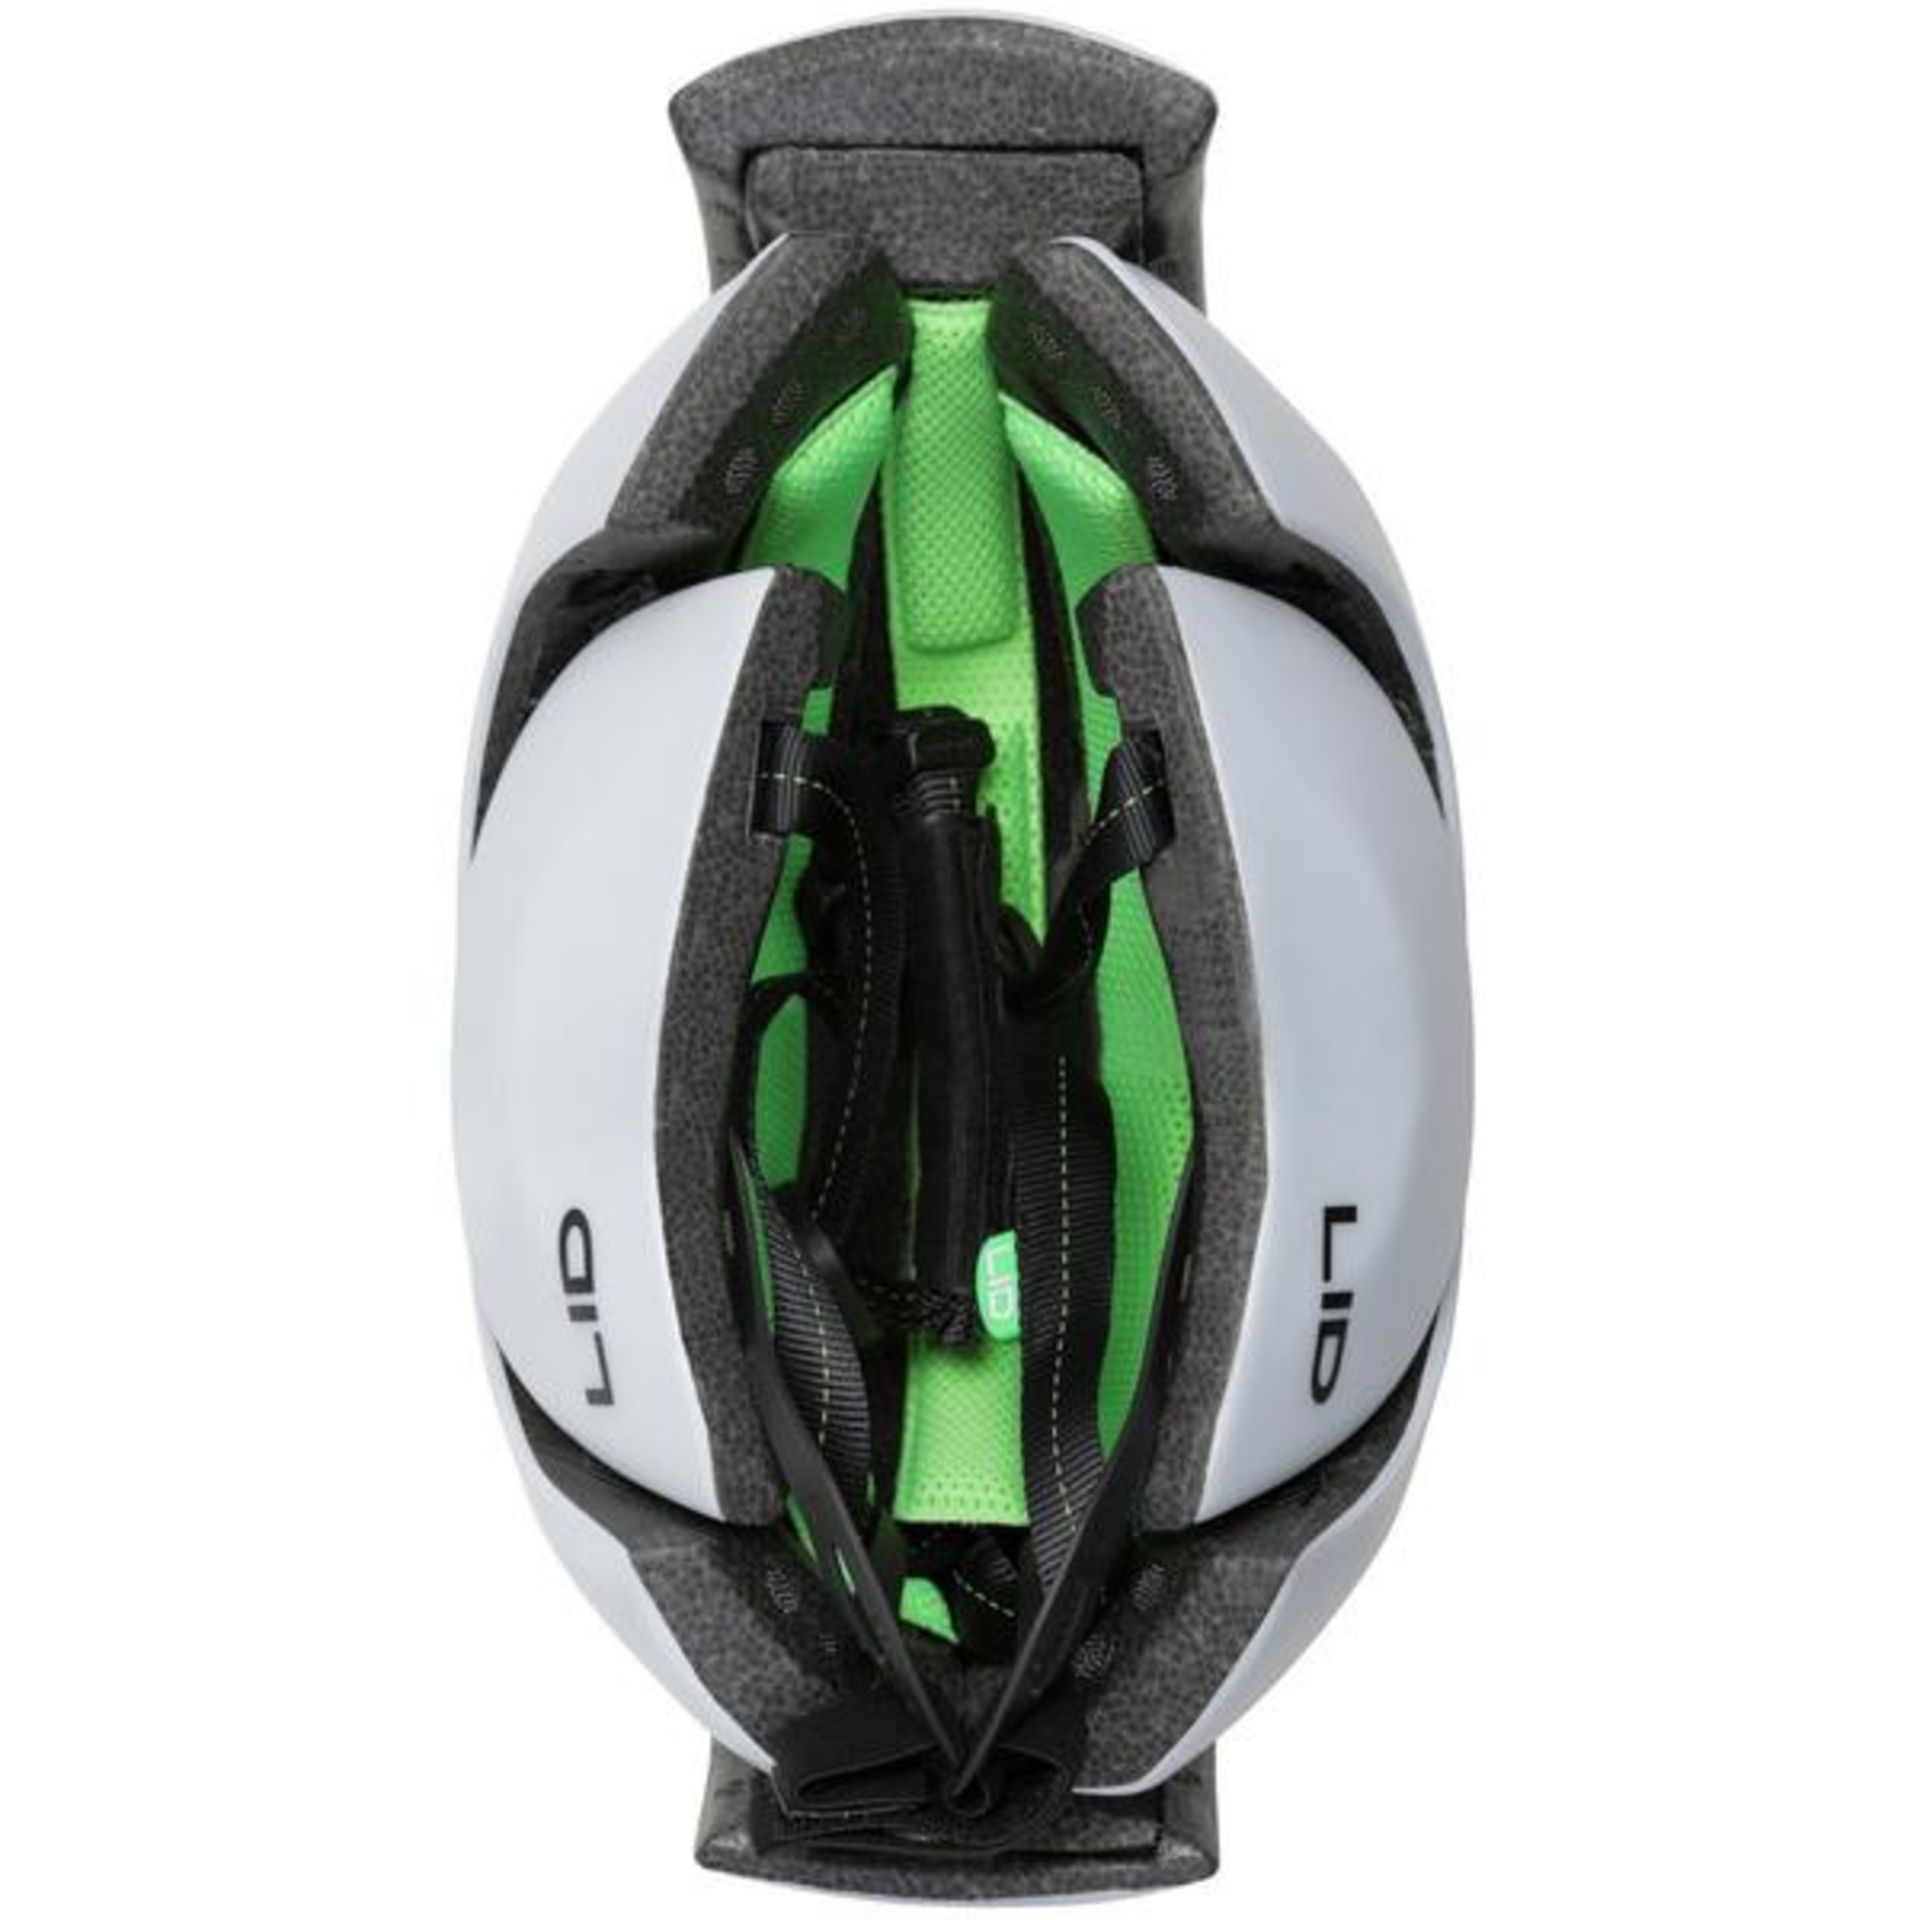 Lid Helmet Liquidation - Over £153k at retail - All new and boxed - Image 13 of 23